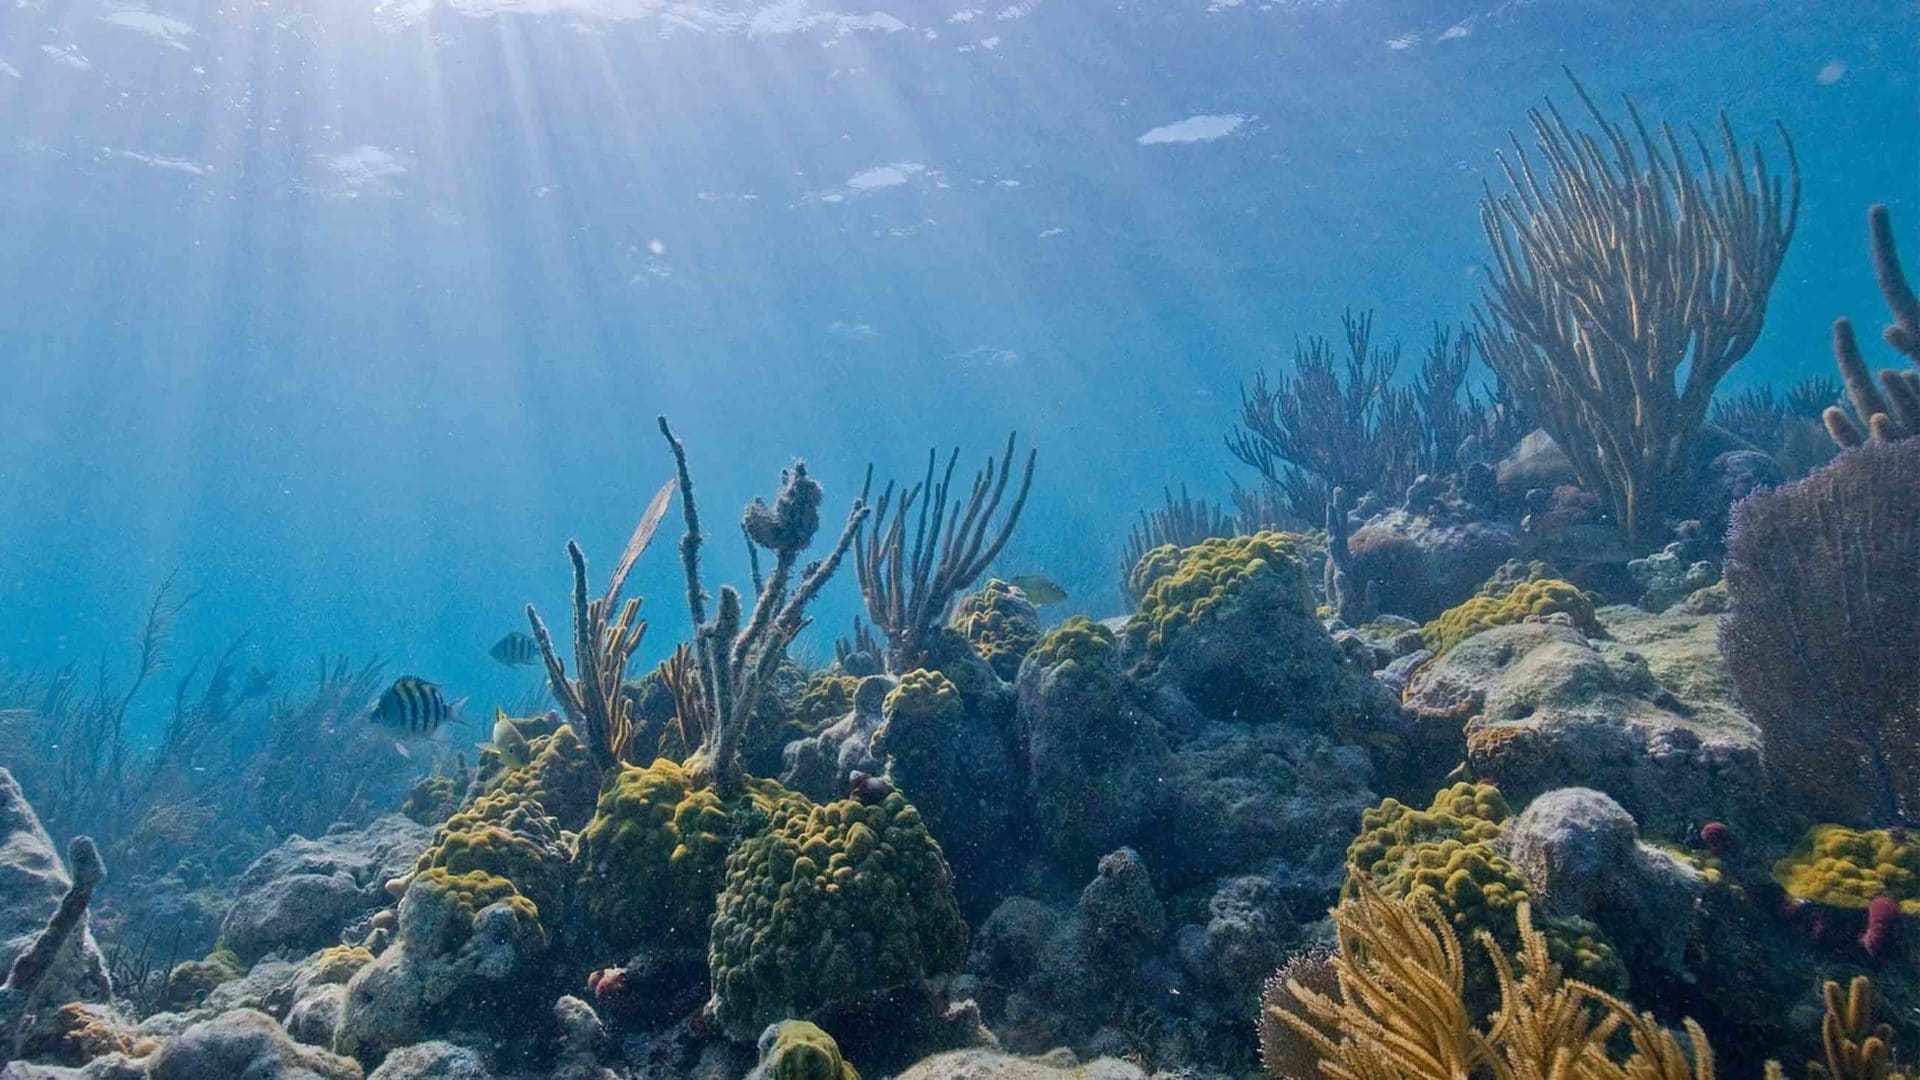 A coral reef in Biscayne National Park, Florida. Reefs act like submerged breakwaters, draining away waves' energy offshore before they can flood coastal properties and communities.